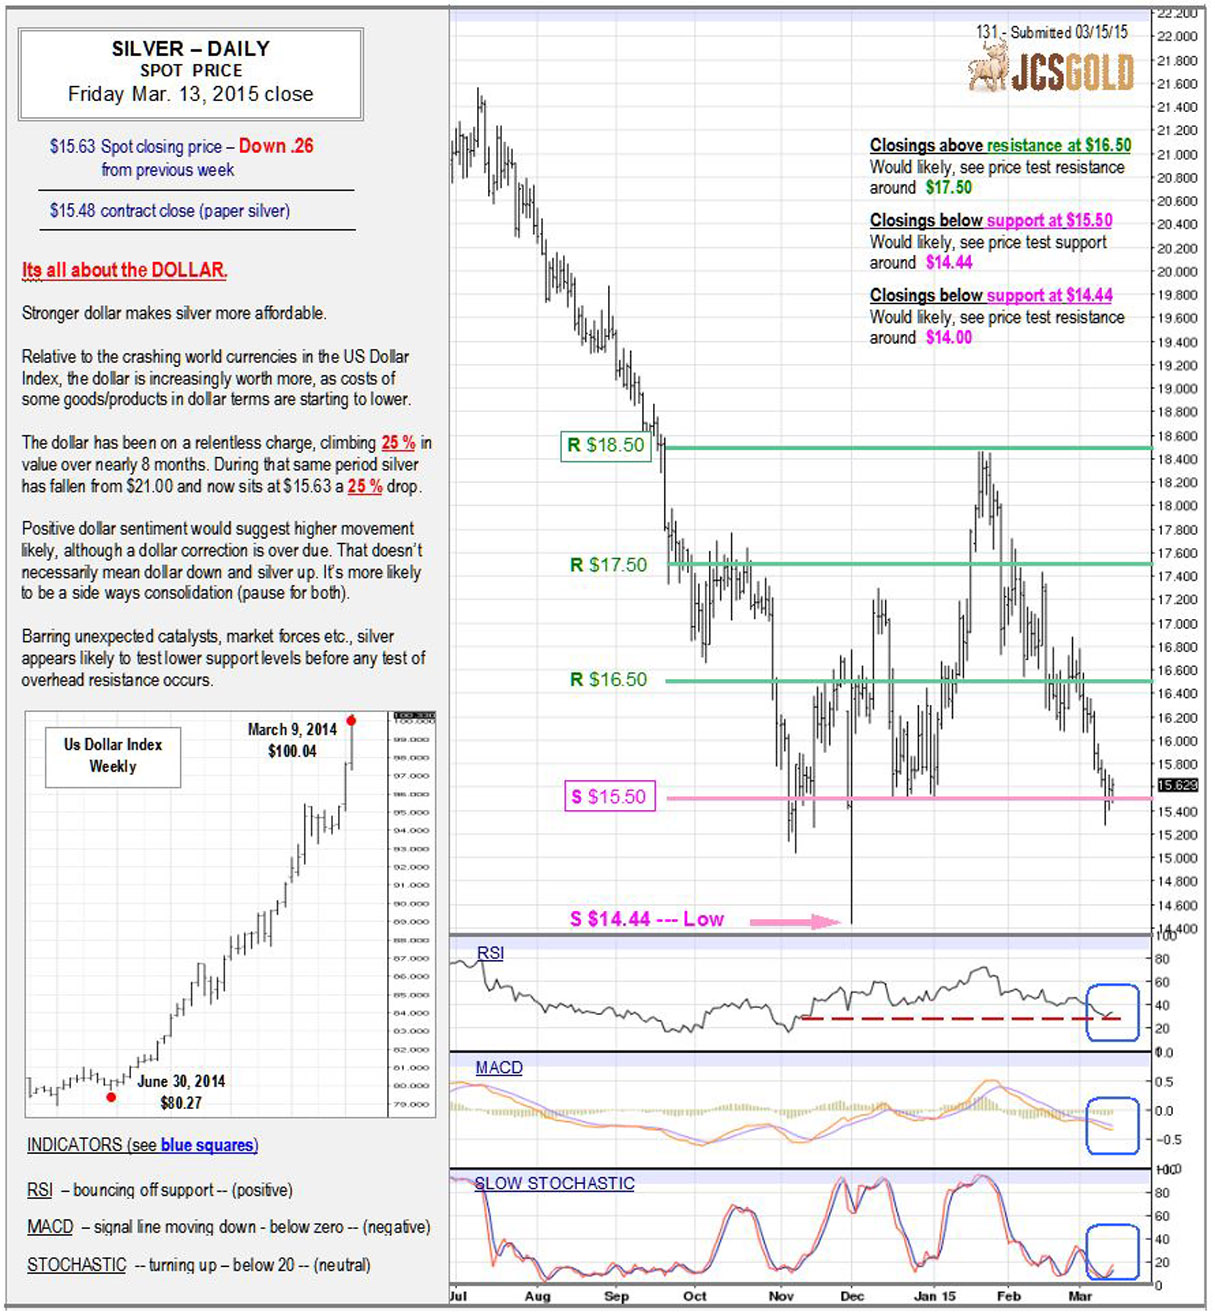 Mar 13, 2015 chart & commentary